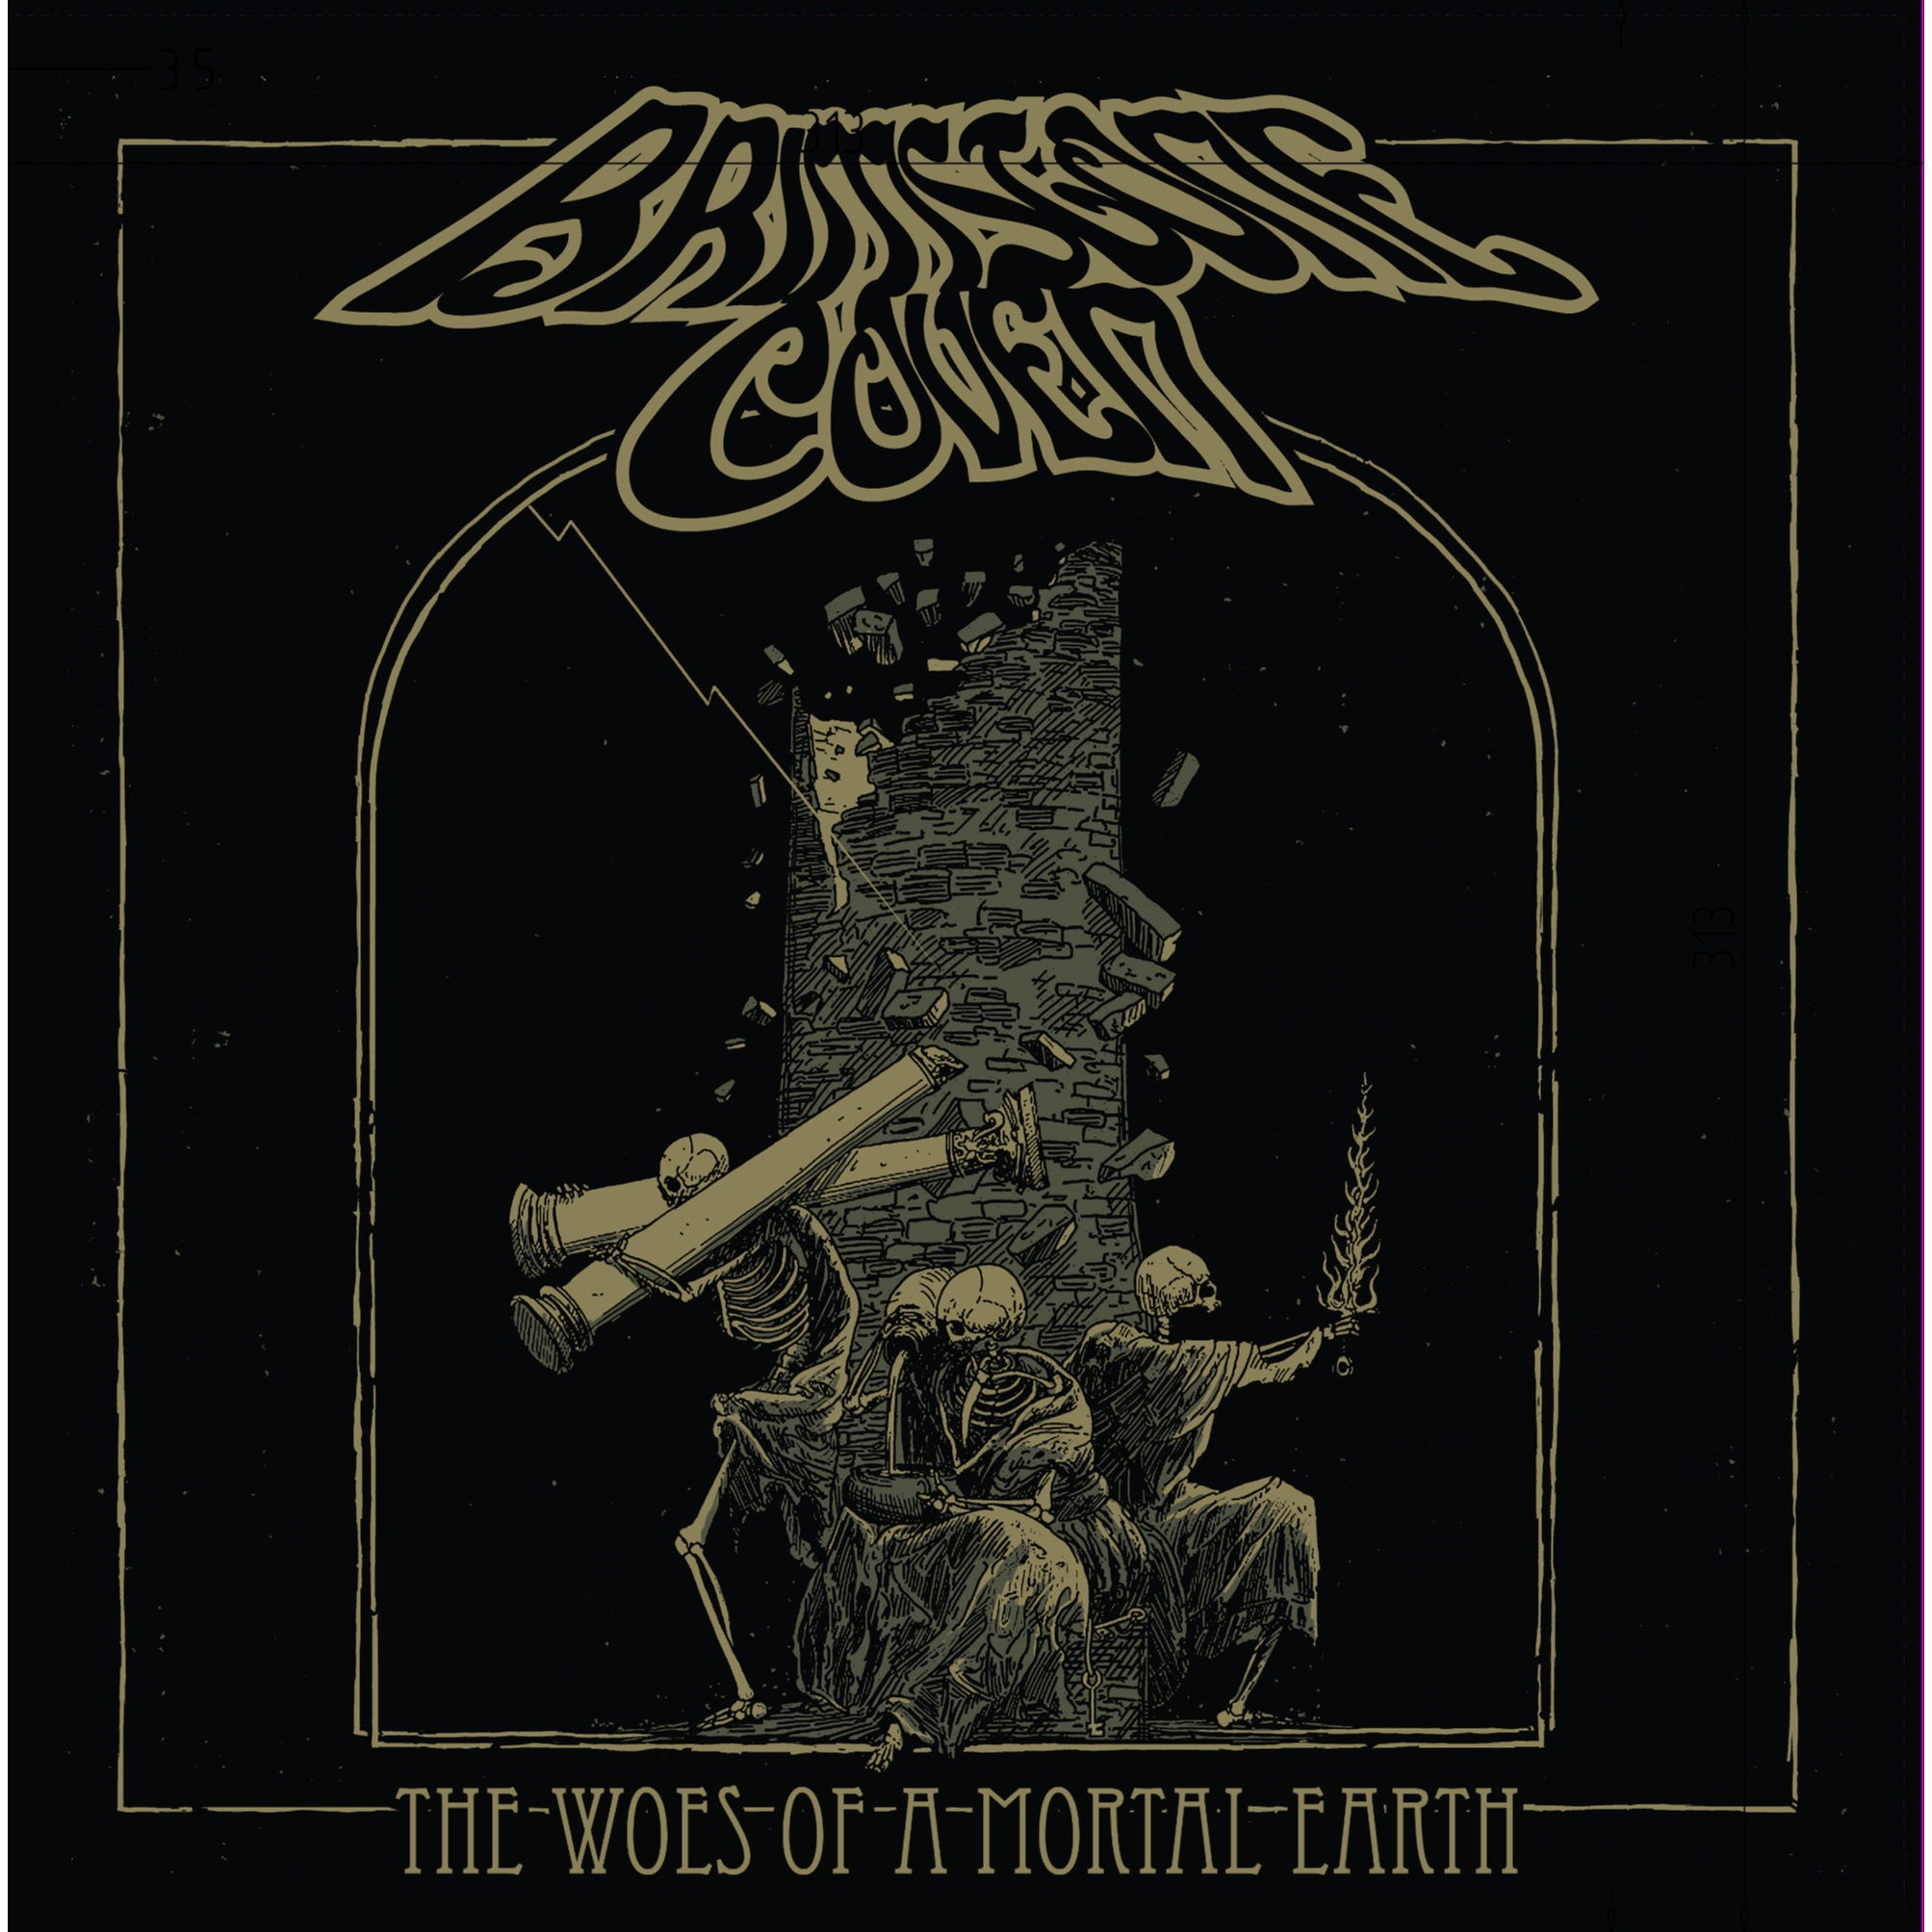 Brimstone Coven – The Woes Of A Mortal Earth (2020) [FLAC 24bit/44,1kHz]